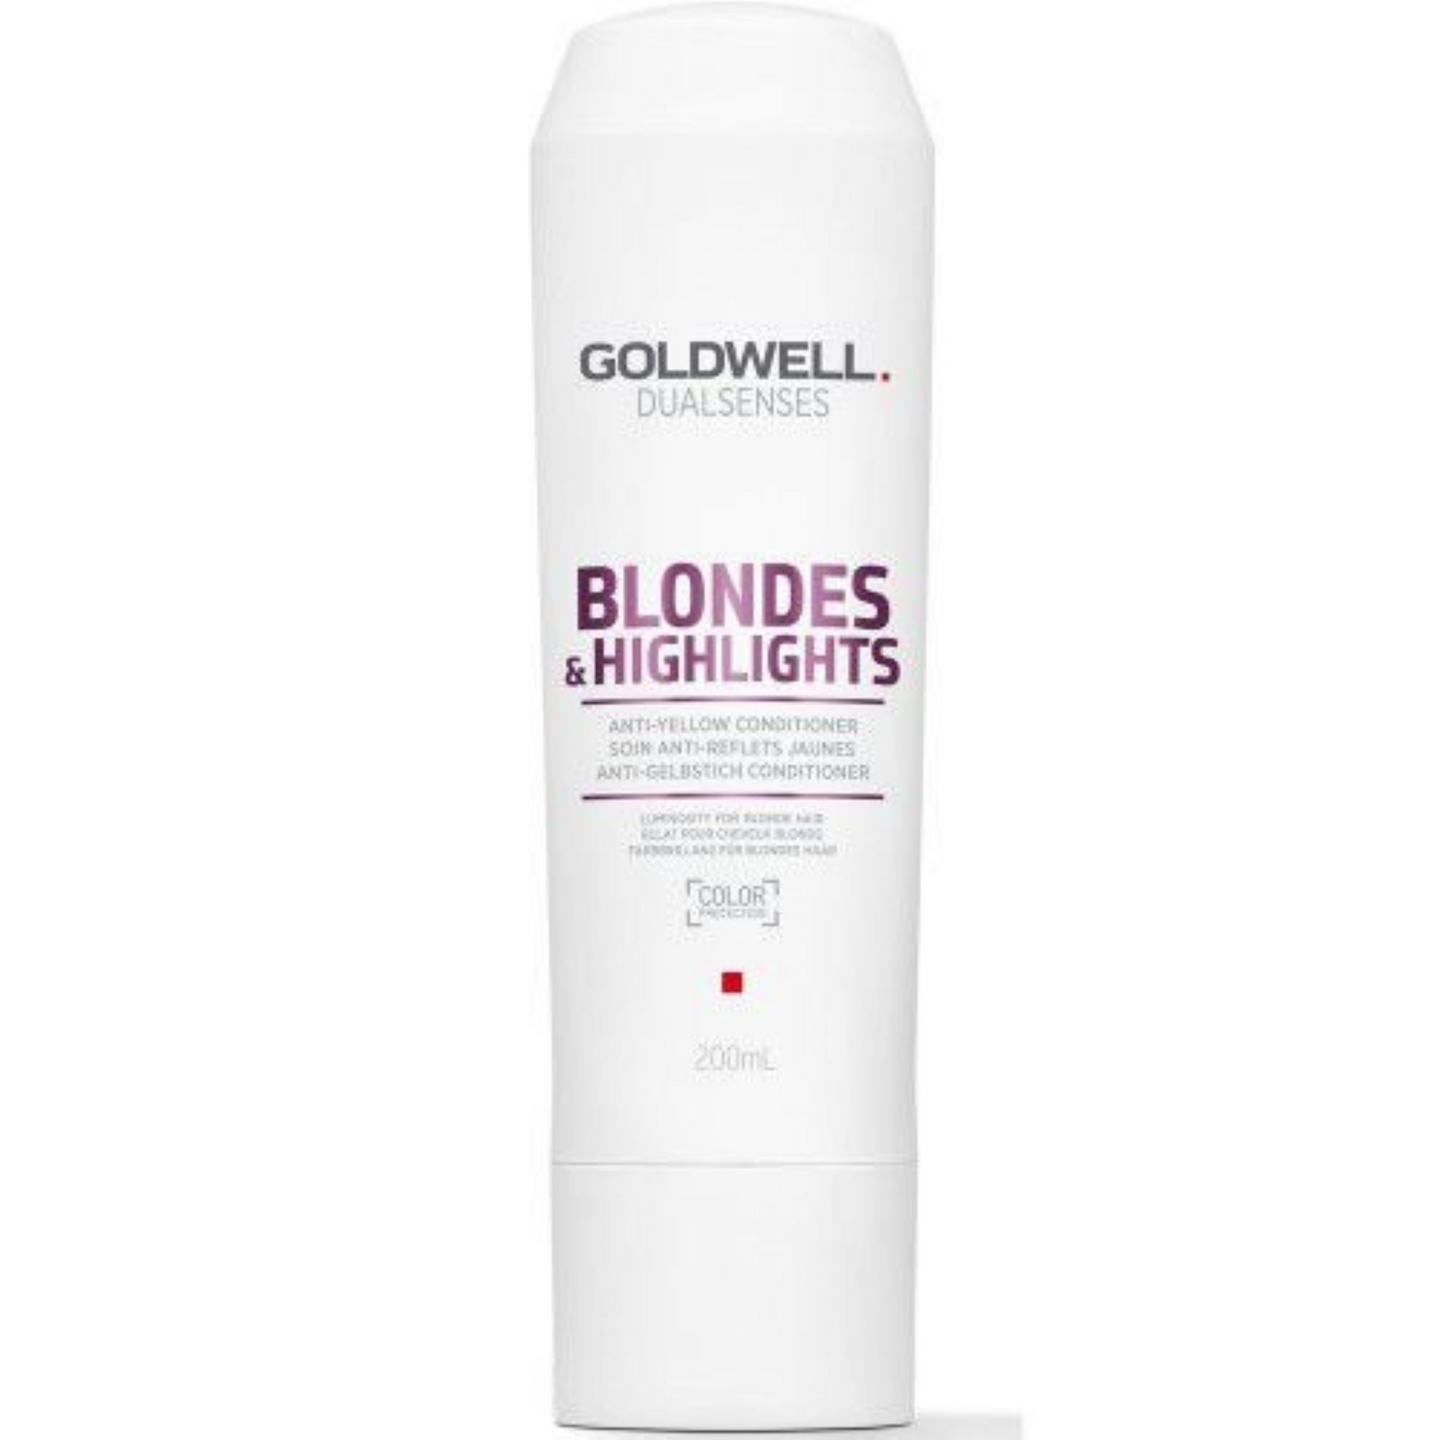 Goldwell Dualsenses hoitoaine 200ml Blondes & Highlights Anti Yellow